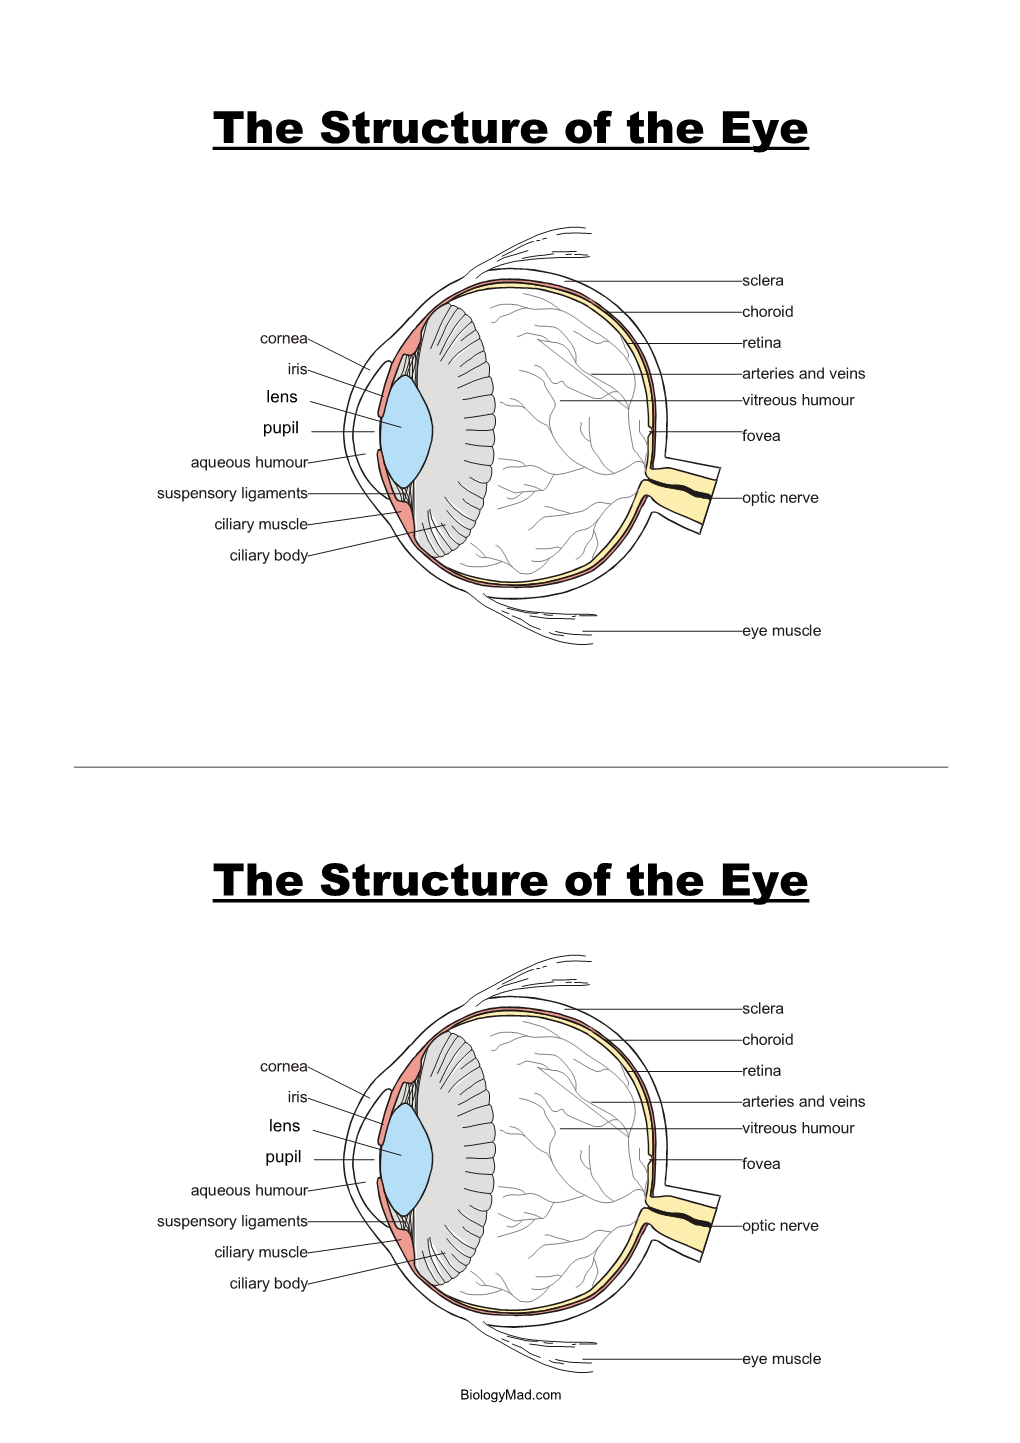 The Structure of the Eye